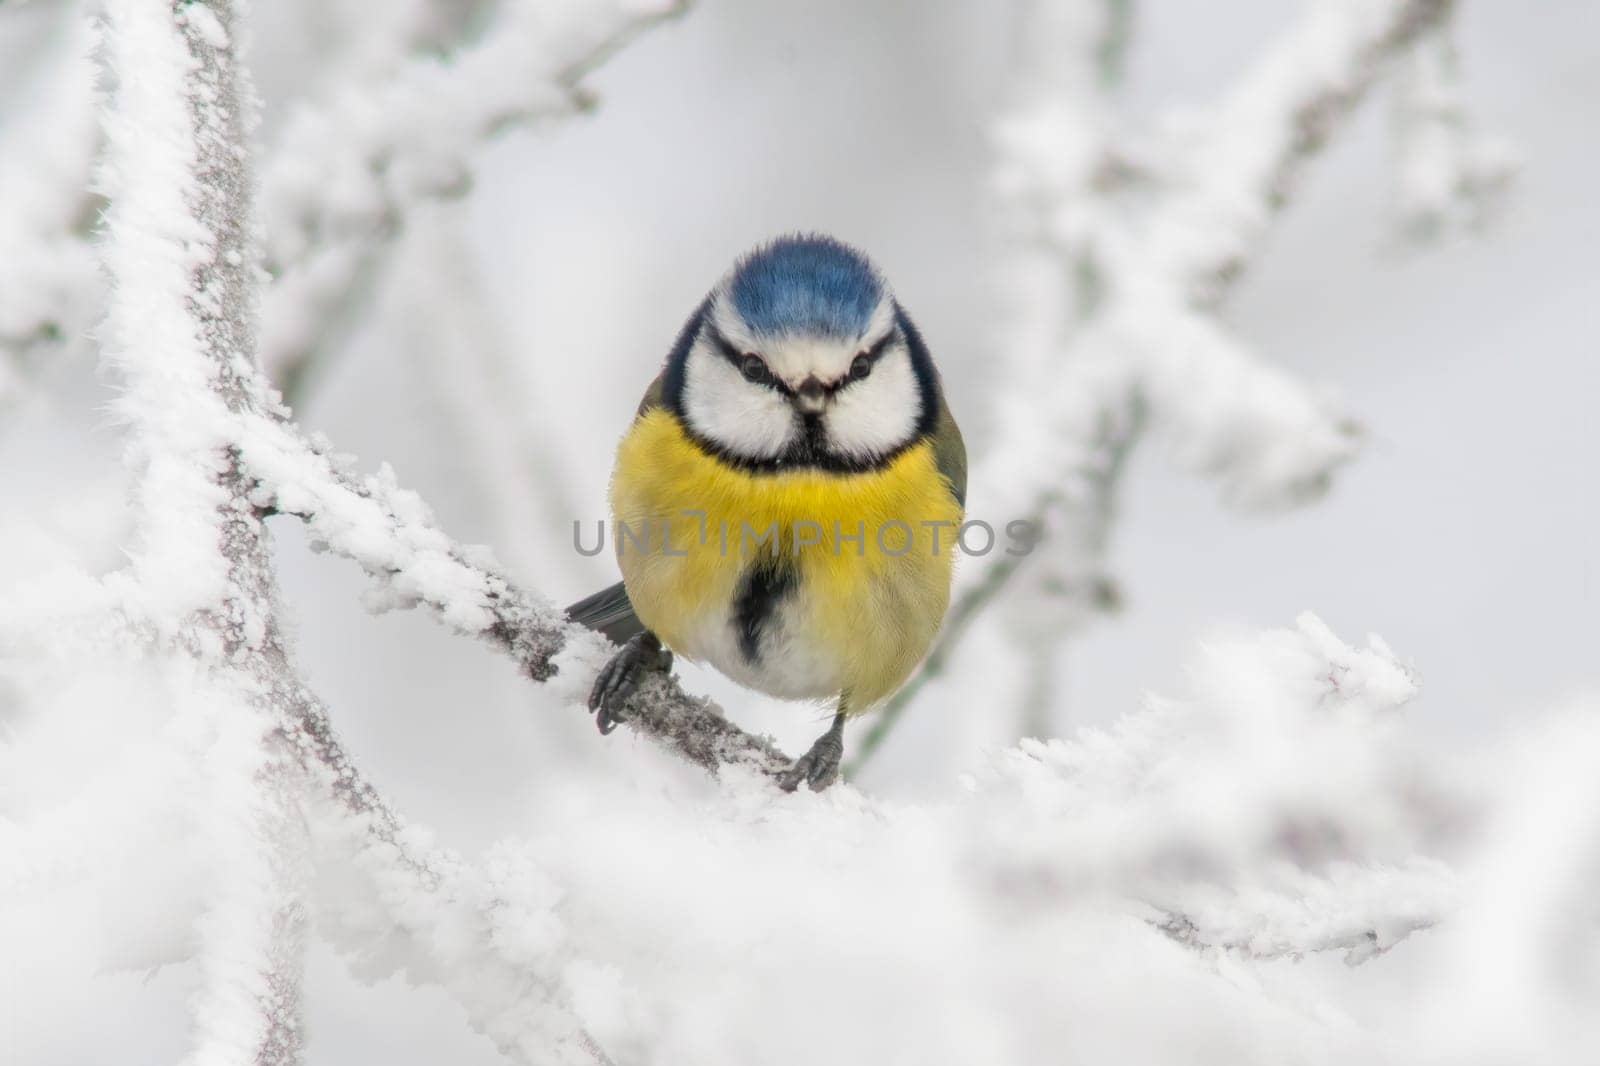 a blue tit sits on snowy branches in cold winter time